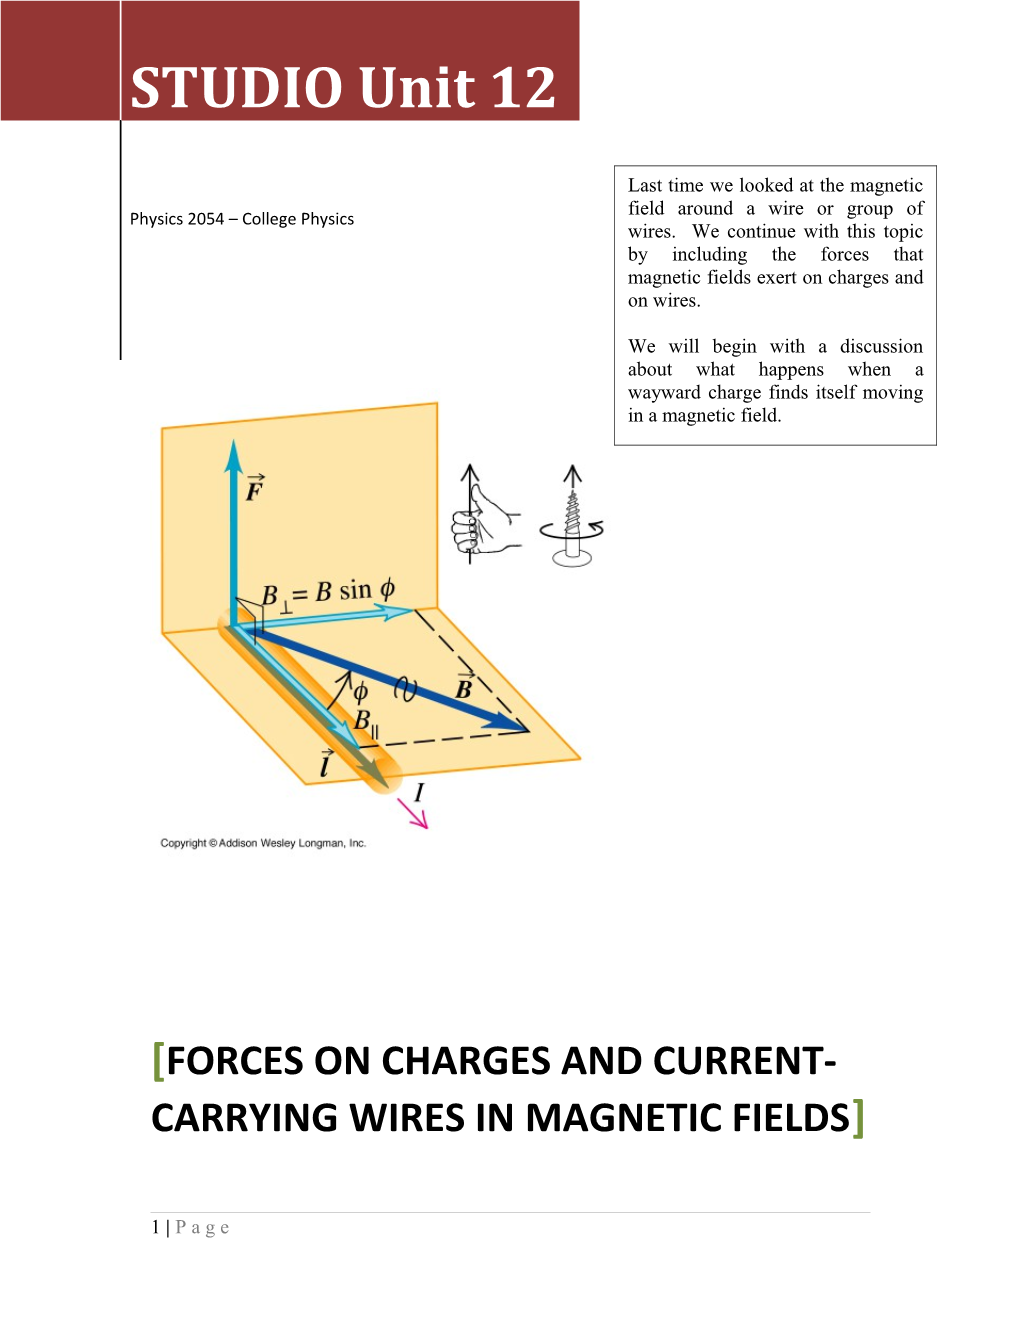 Forces on Current-Carrying Wires and Charges in Magnetic Fields